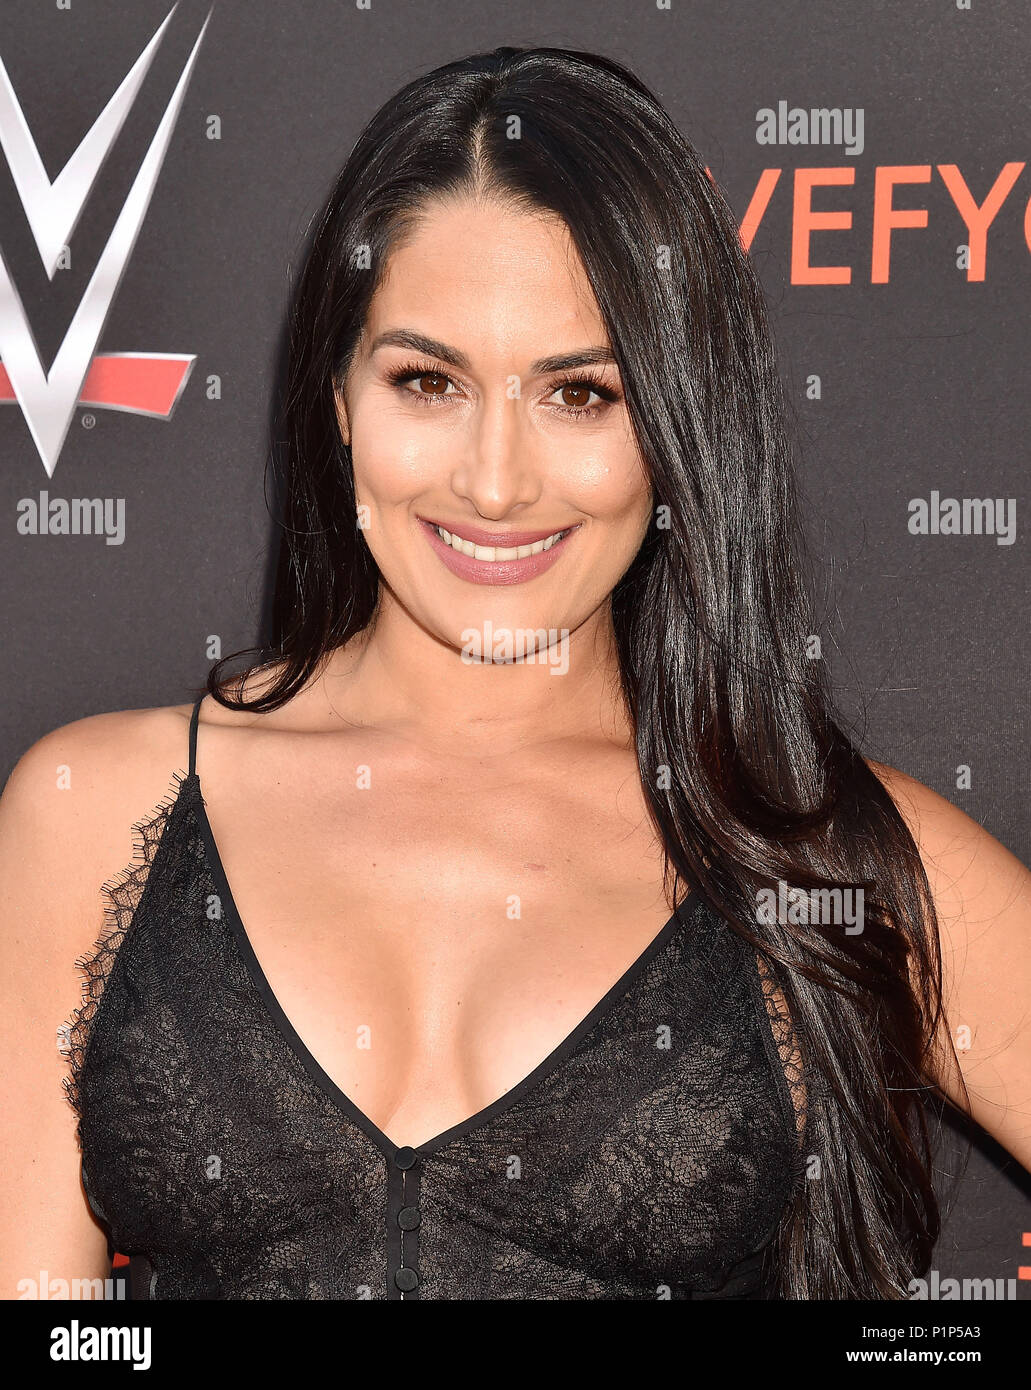 NORTH HOLLYWOOD, CA - JUNE 06: Nikki Bella attends WWE's first-ever Emmy 'For Your Consideration' event at Saban Media Center on June 6, 2018 in North Hollywood, California. Stock Photo